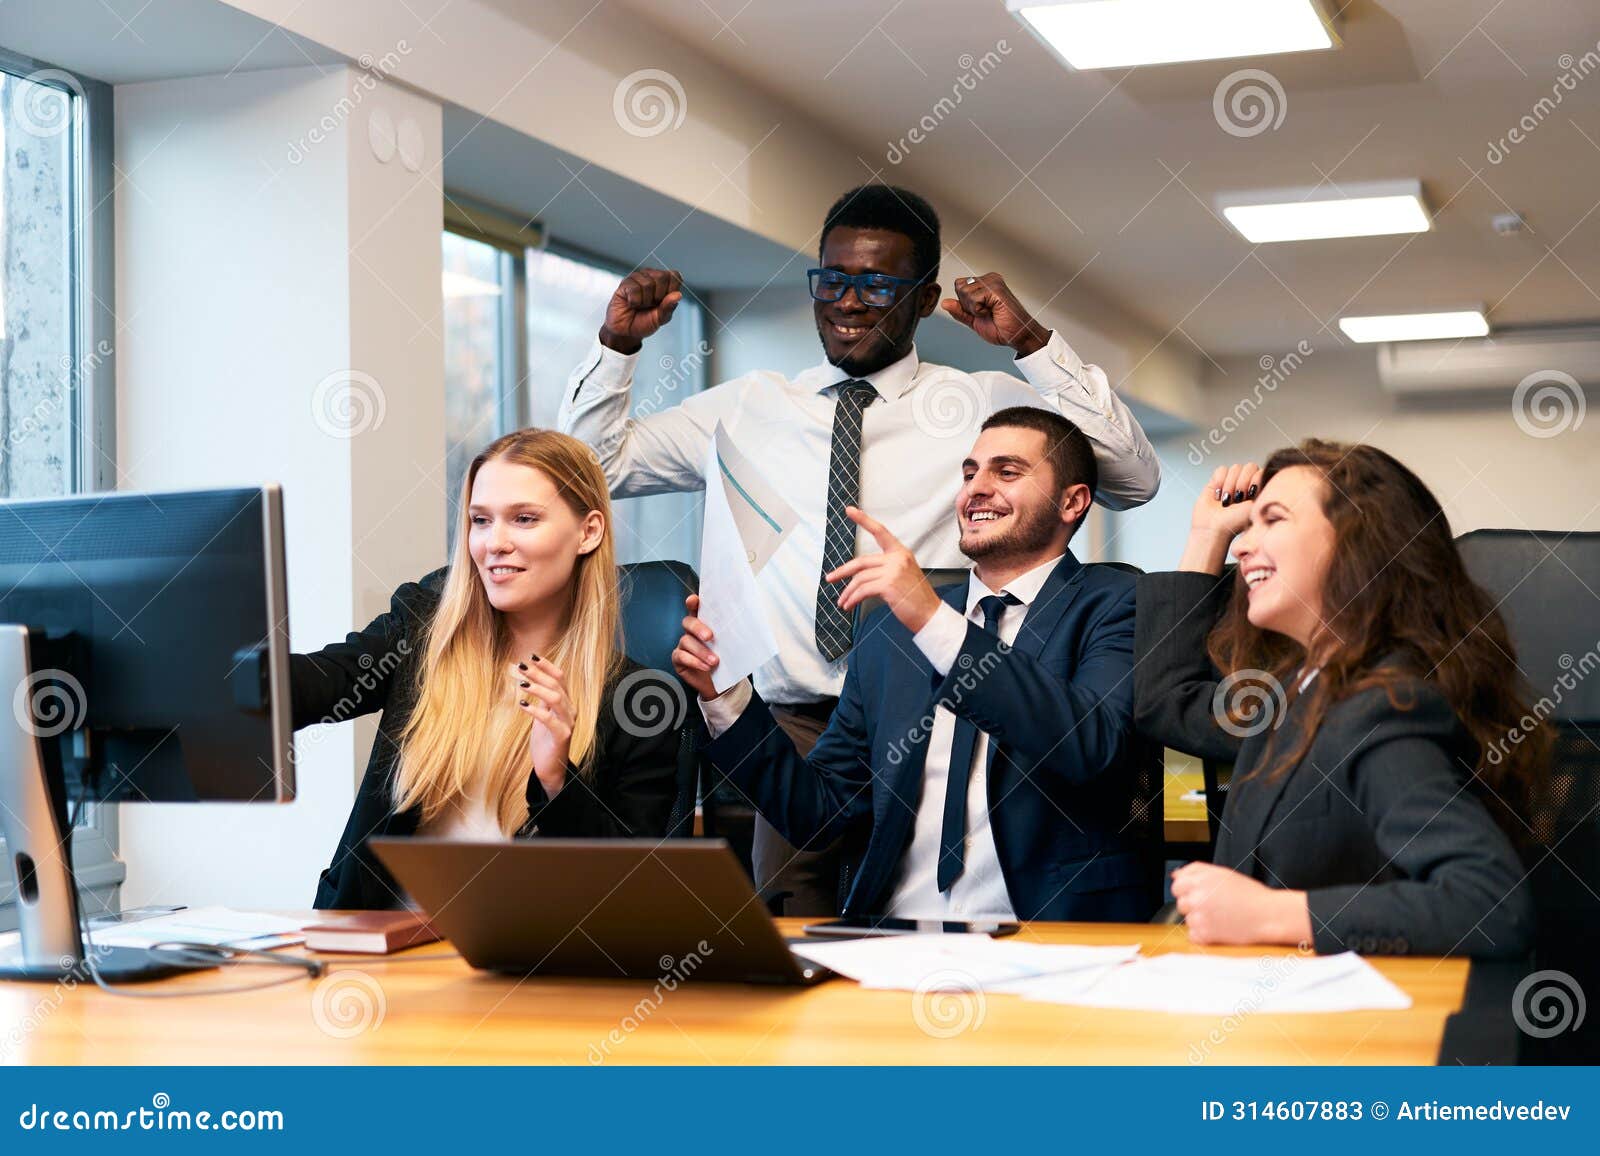 multiethnic office team rejoices around computer, happy african exec raises fists in victory, coworkers cheer, man